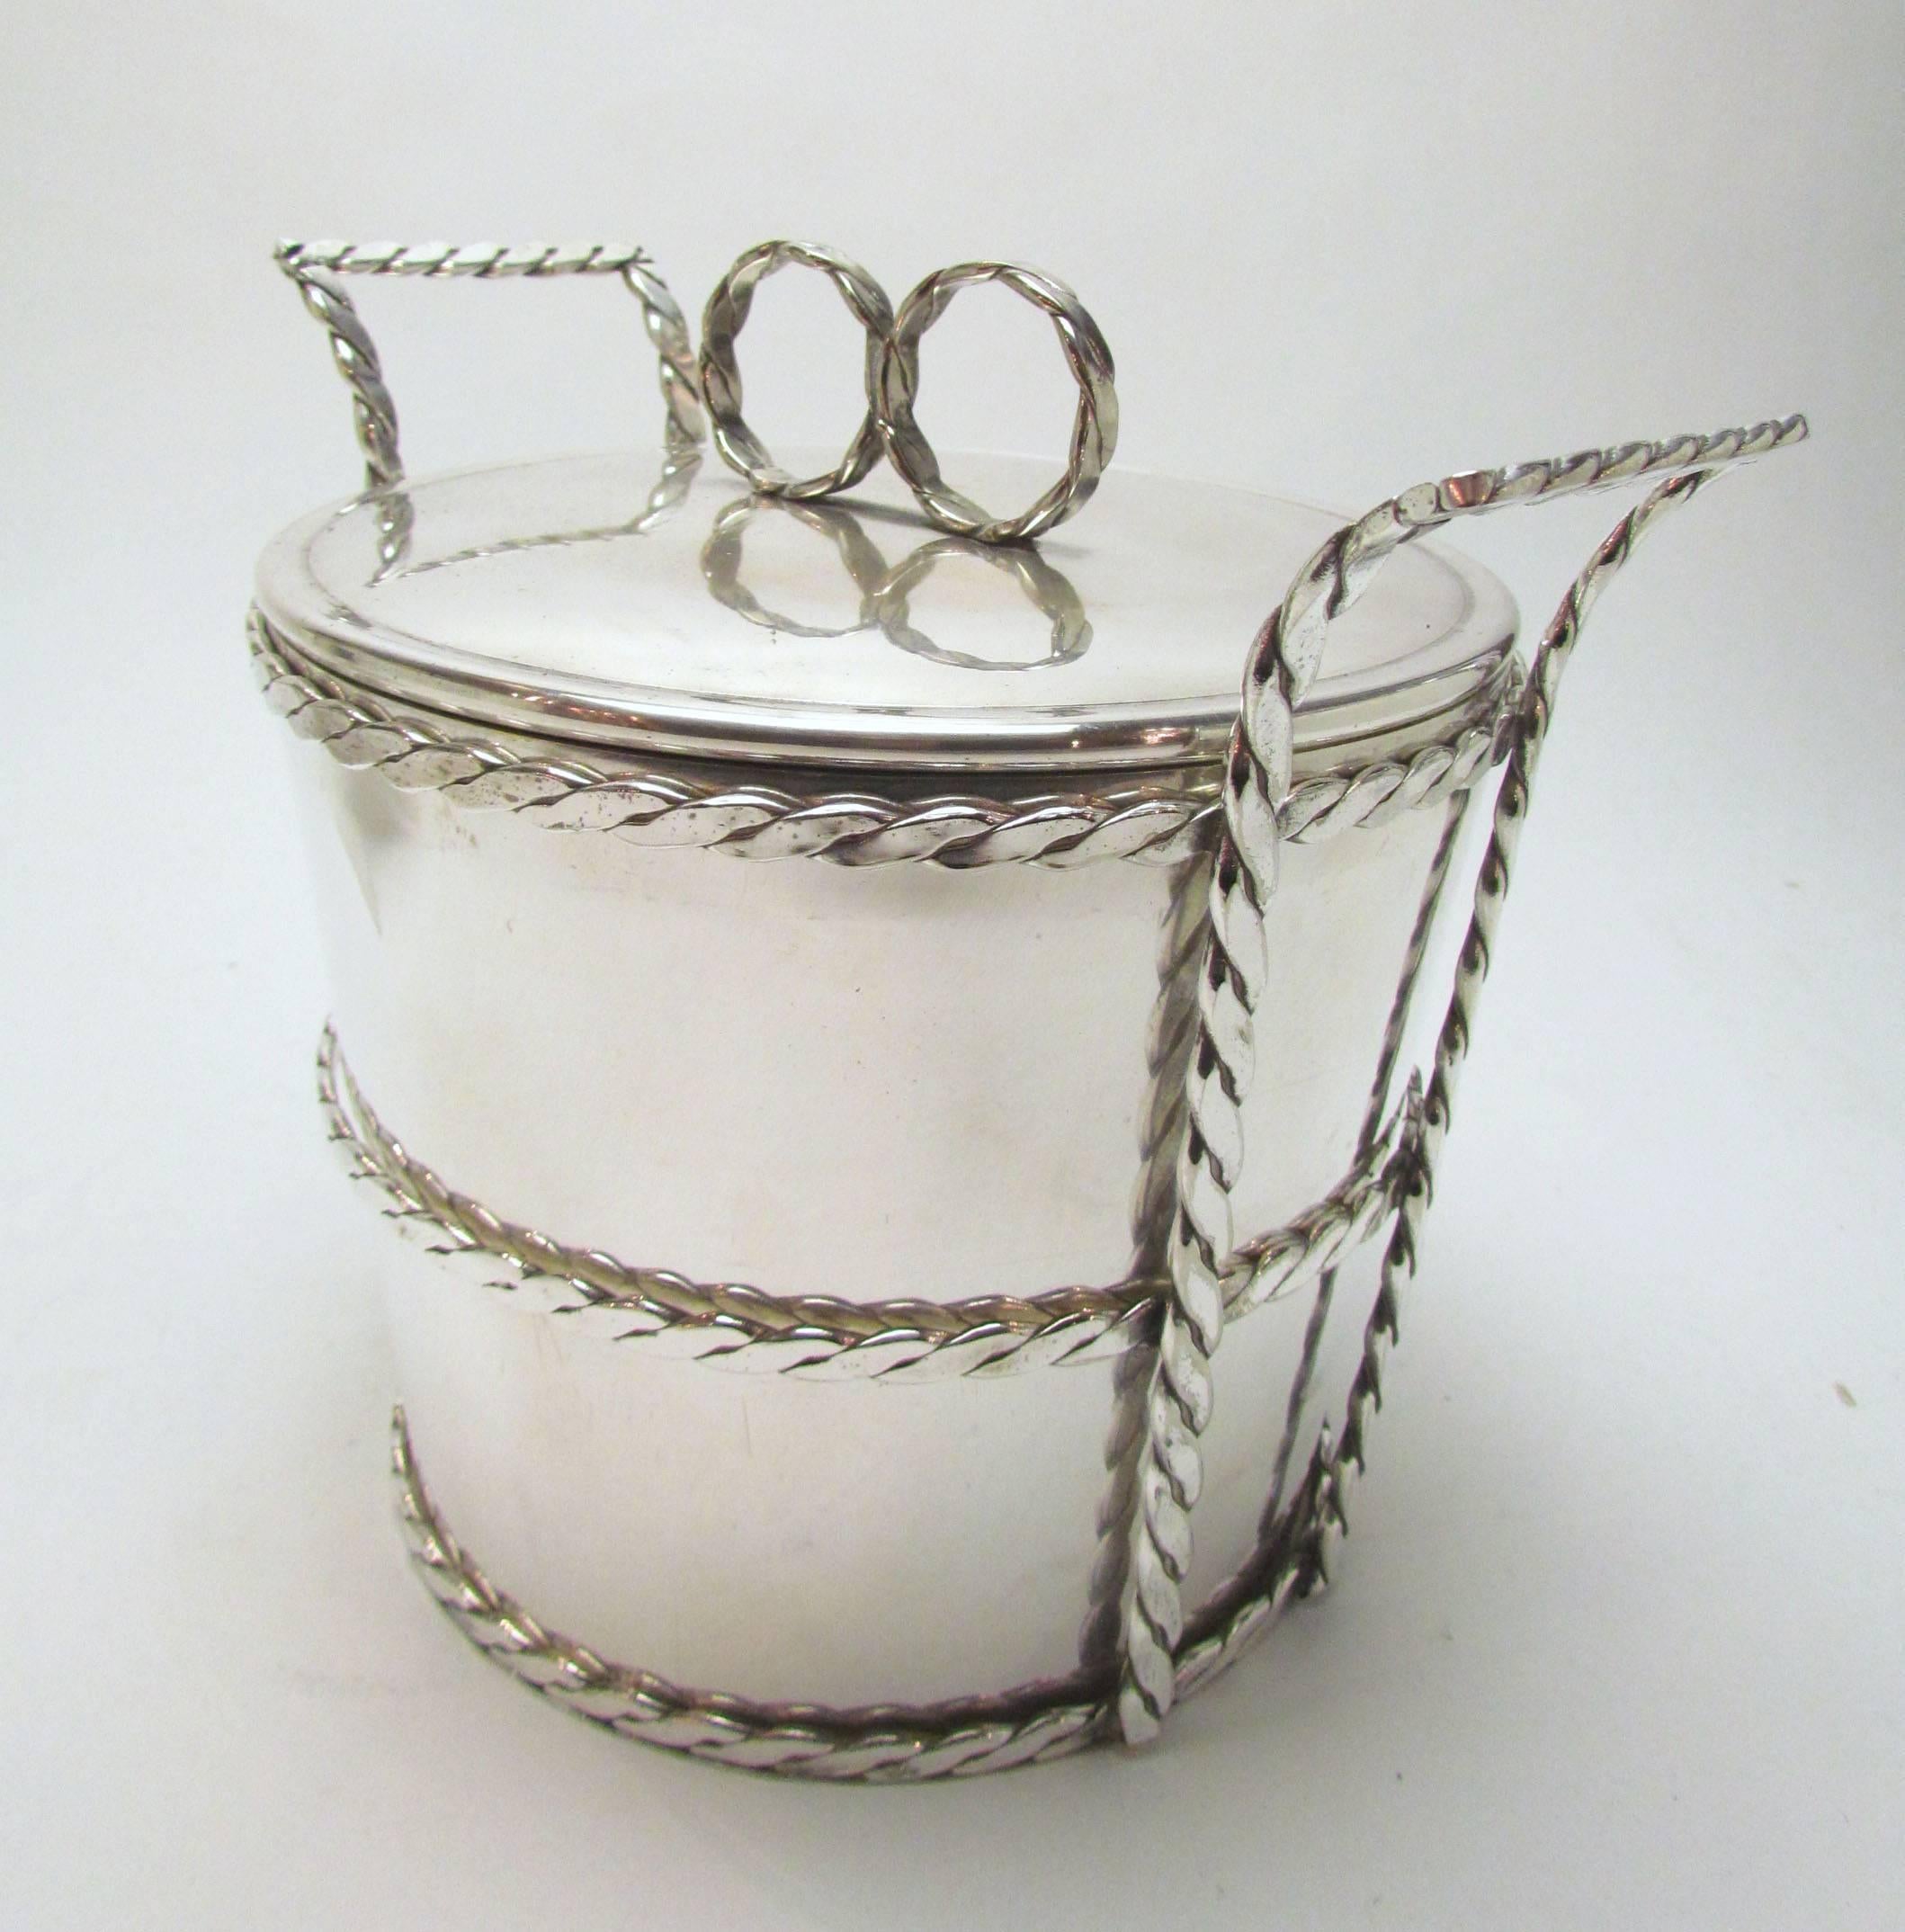 Silver plate ice bucket by Cartier, stamped on bottom, and made in Italy. Interior insulated bowl is removable so that bucket can be used to chill a bottle of sparkling wine.